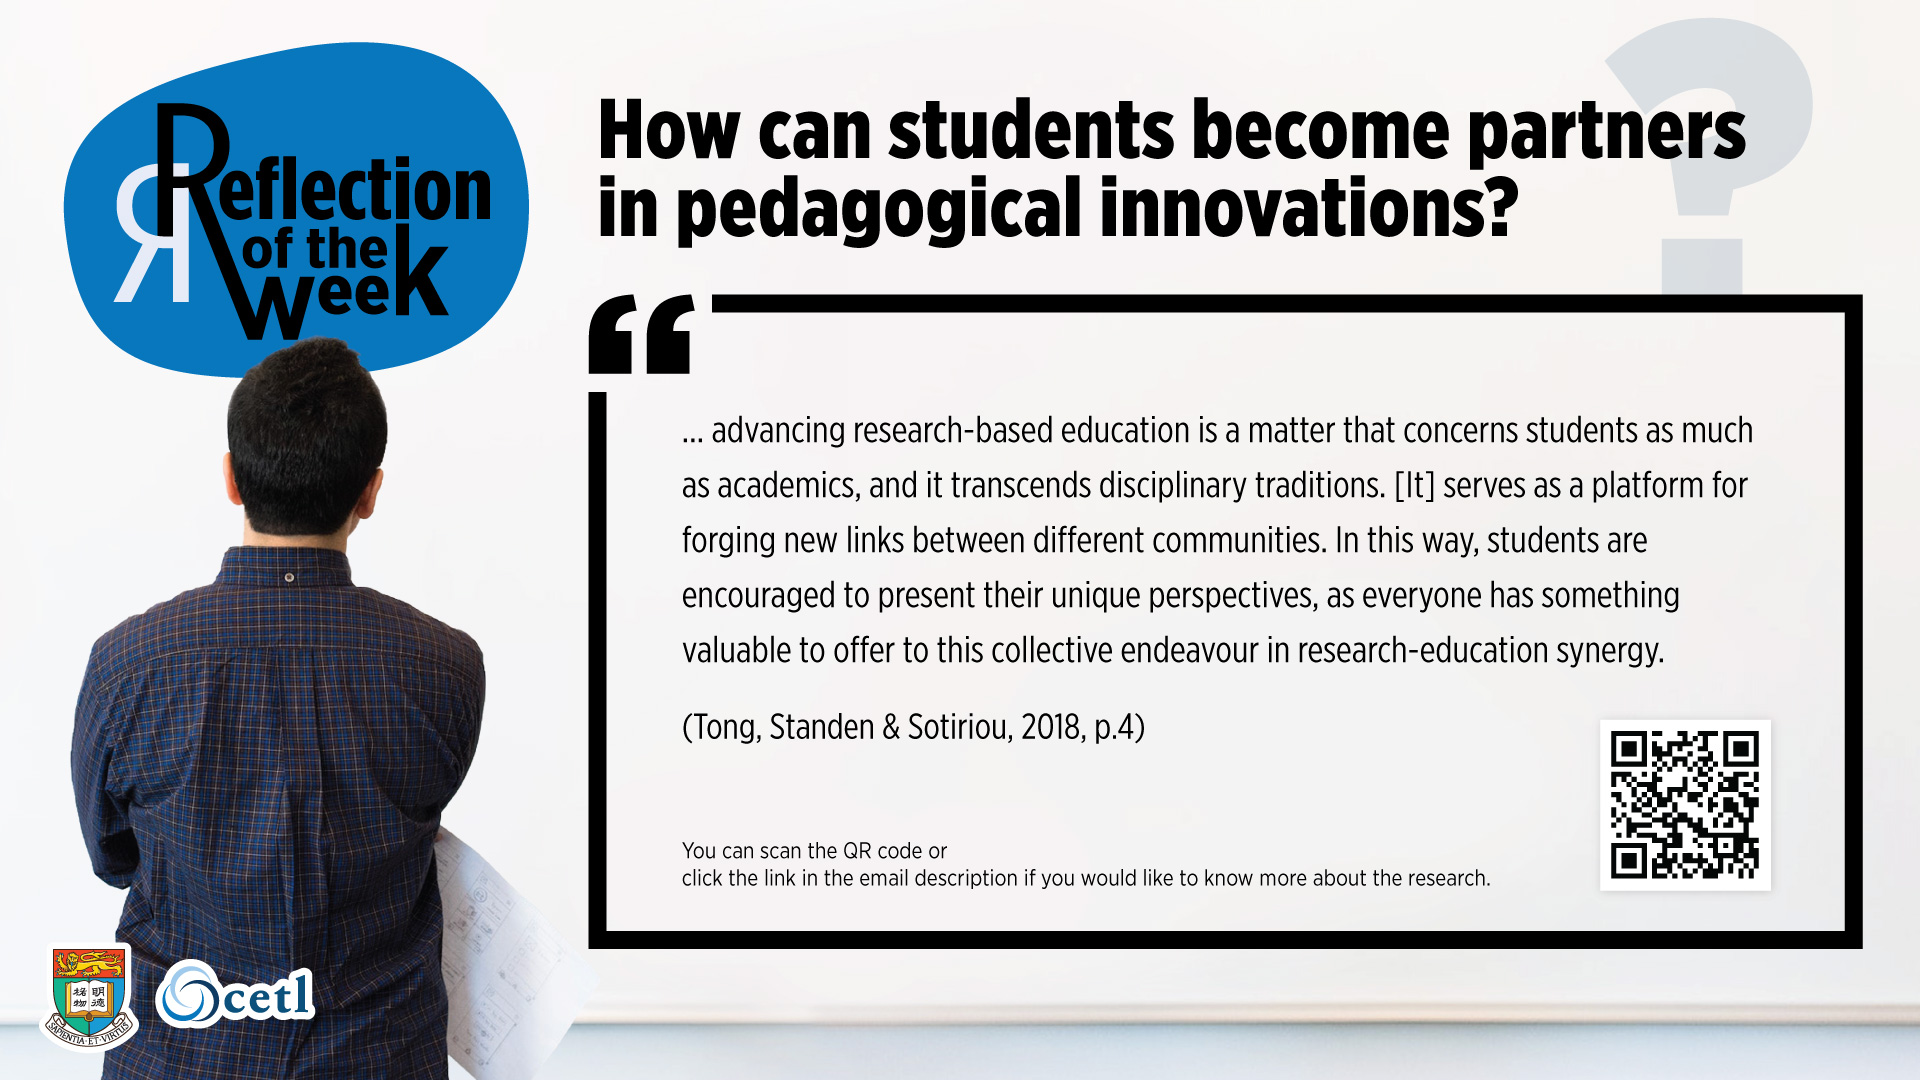 Tong, Standen & Sotiriou (2018) - How can students become partners in pedagogical innovations?